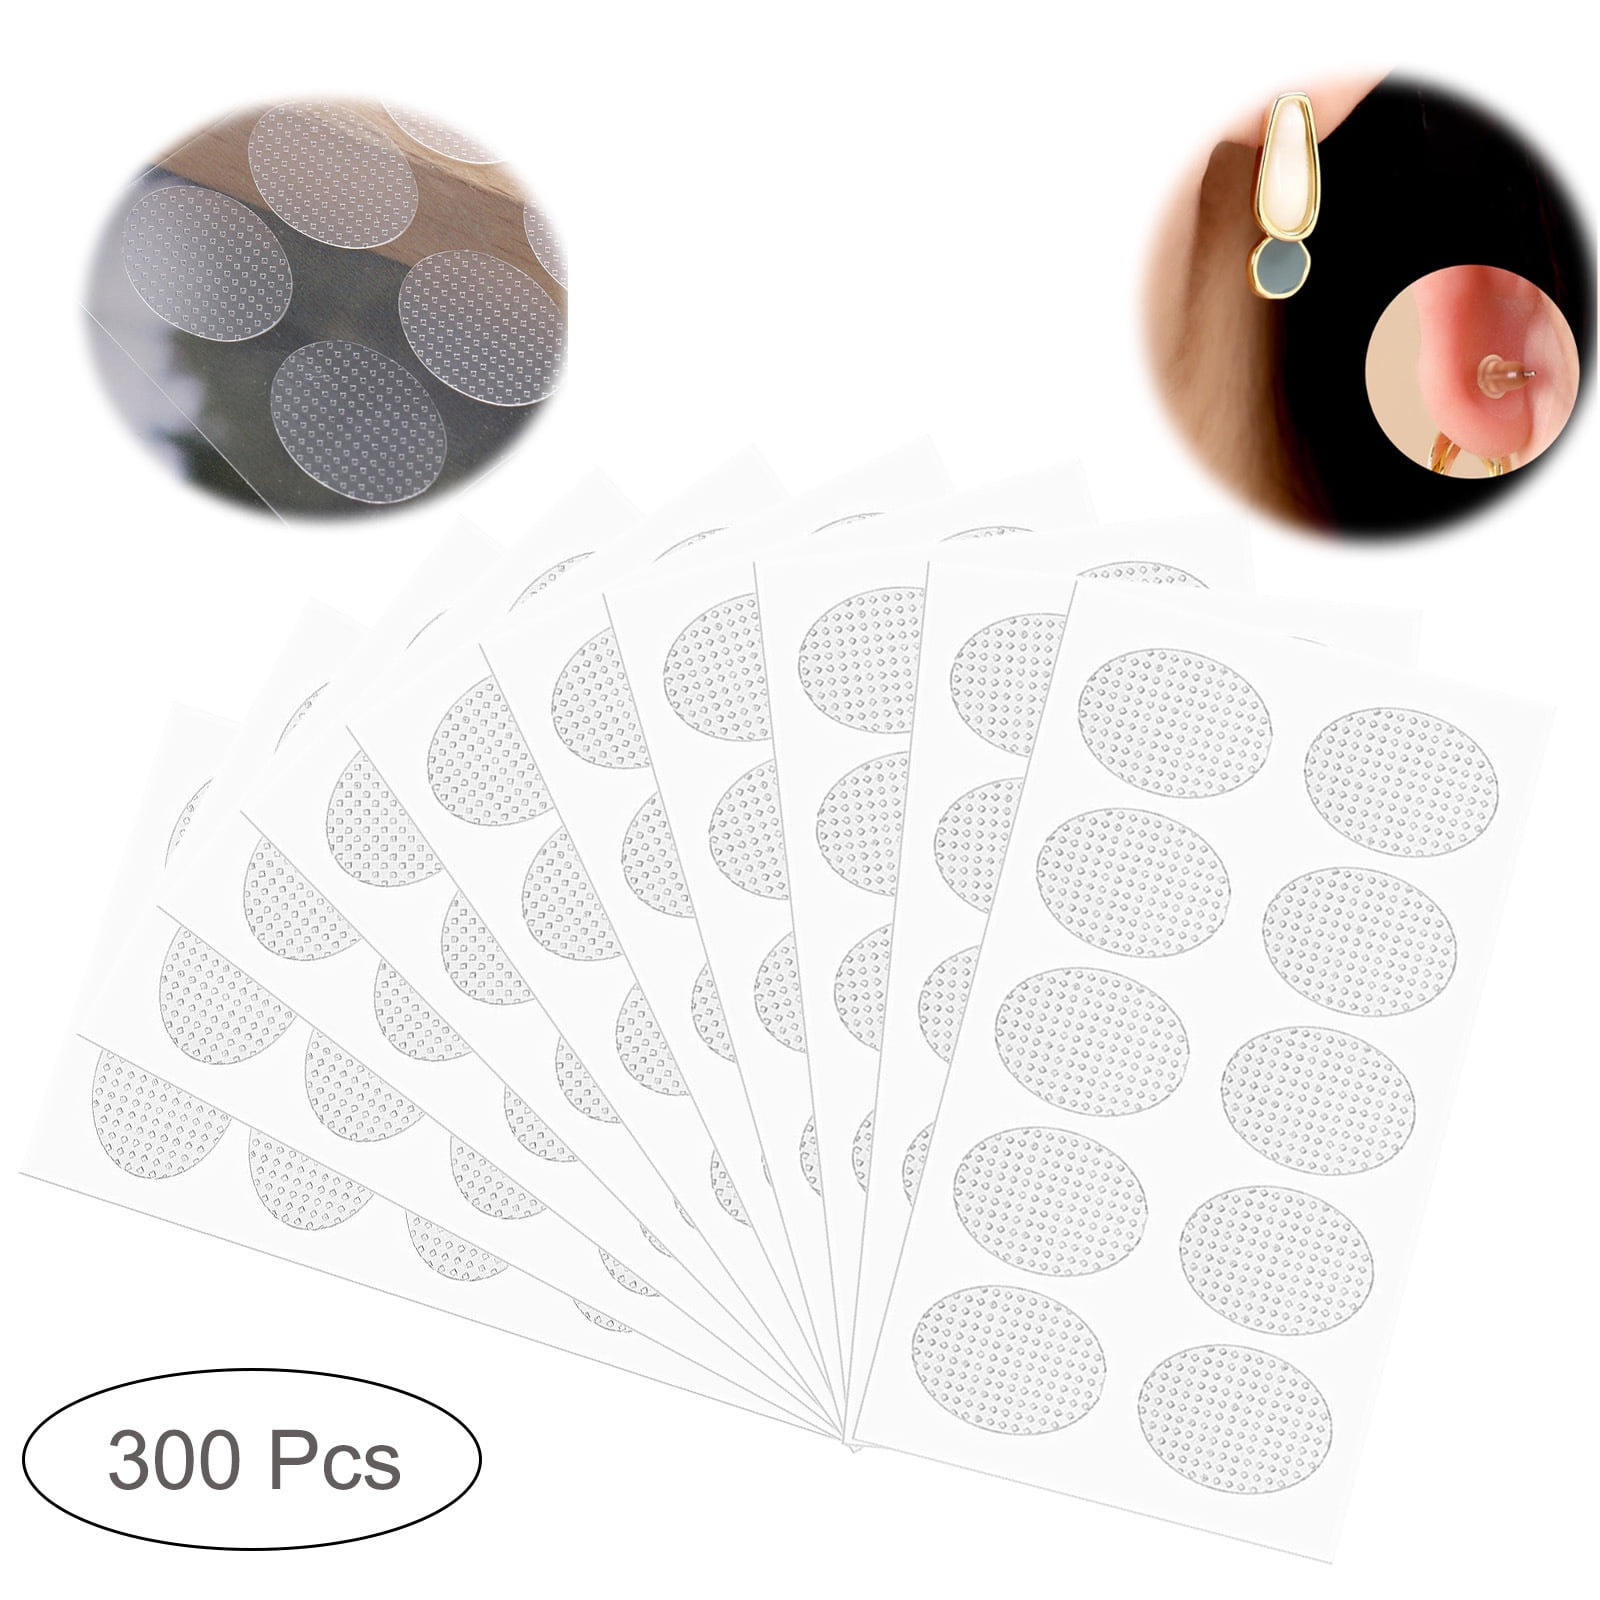 300 Pcs Earring Stickers for Split Earlobes Ear Stickers for Heavy Earrings  Support Protectors Patches Large Earring Stabilizers Stickers Ear Lobe